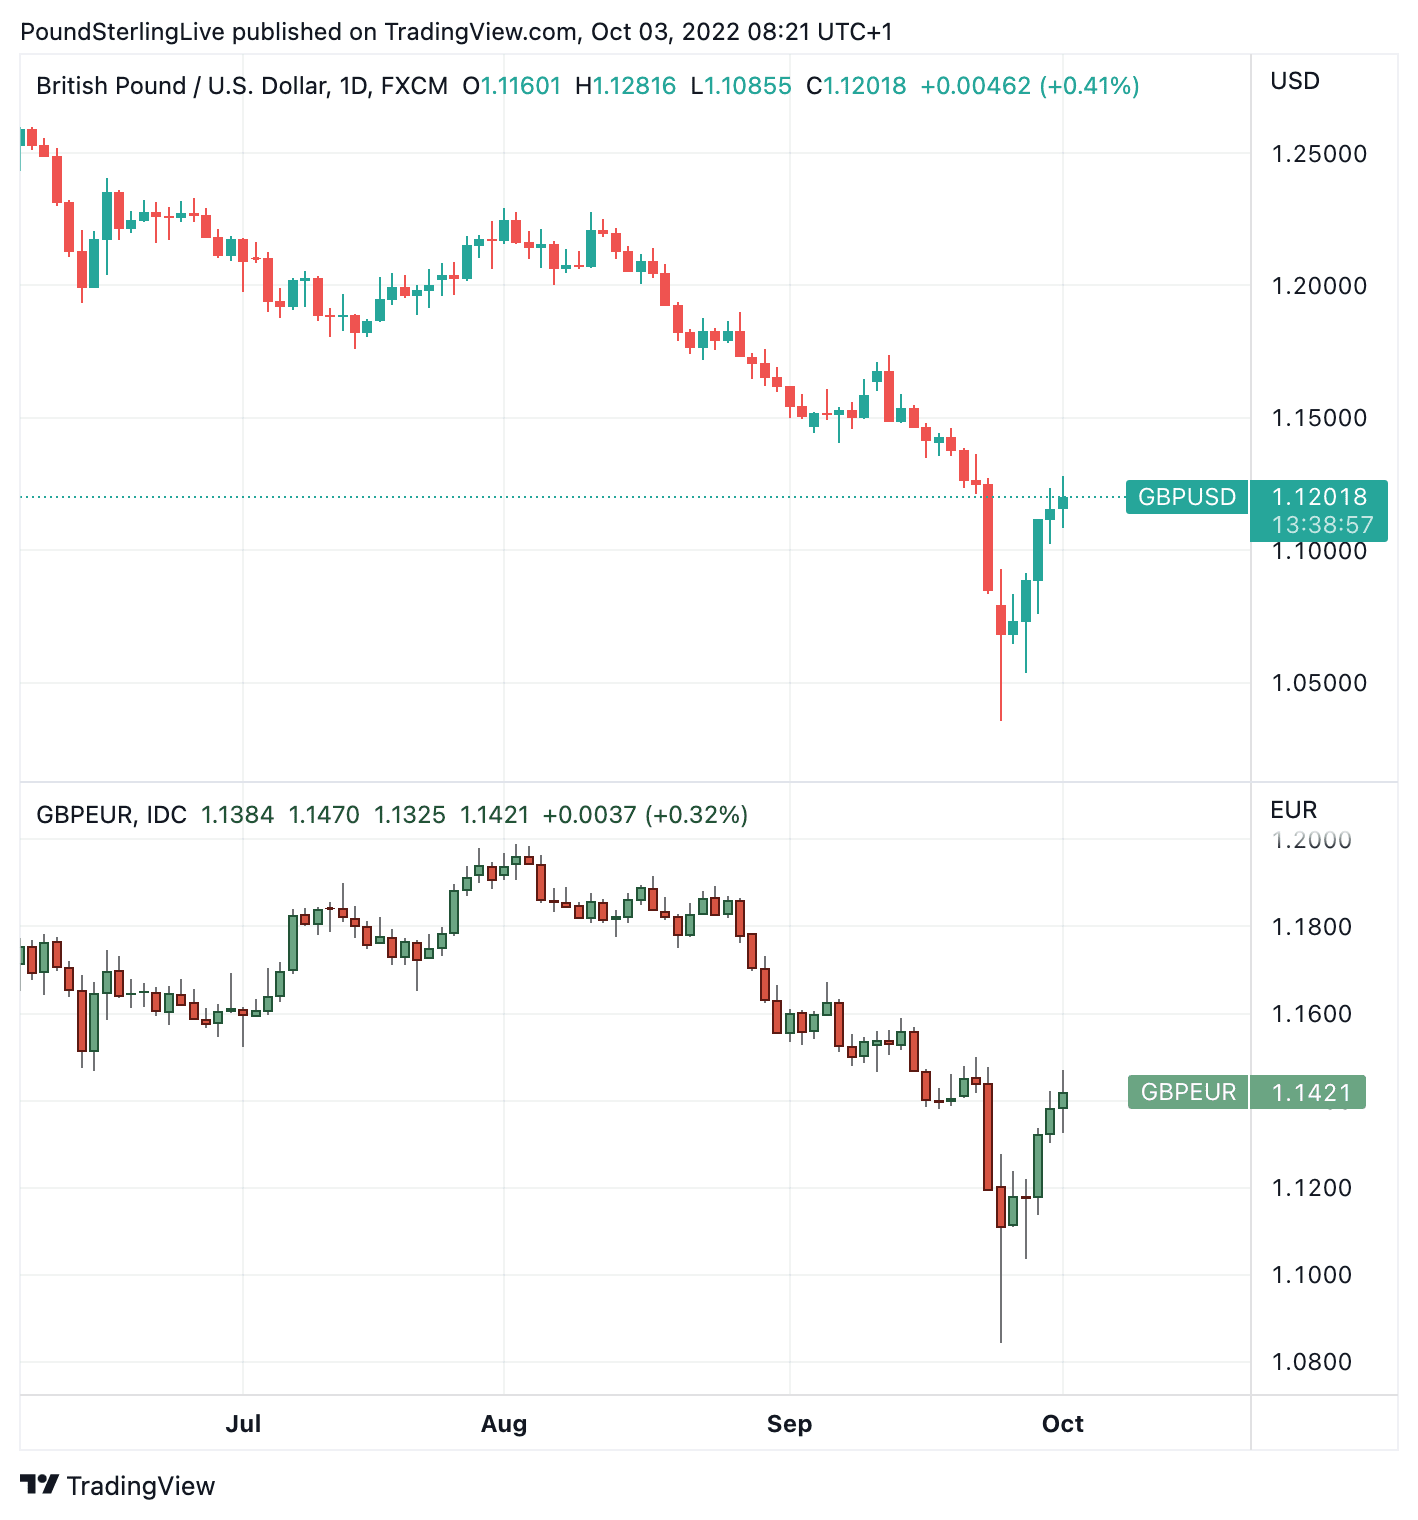 GBPUSD and GBPEUR